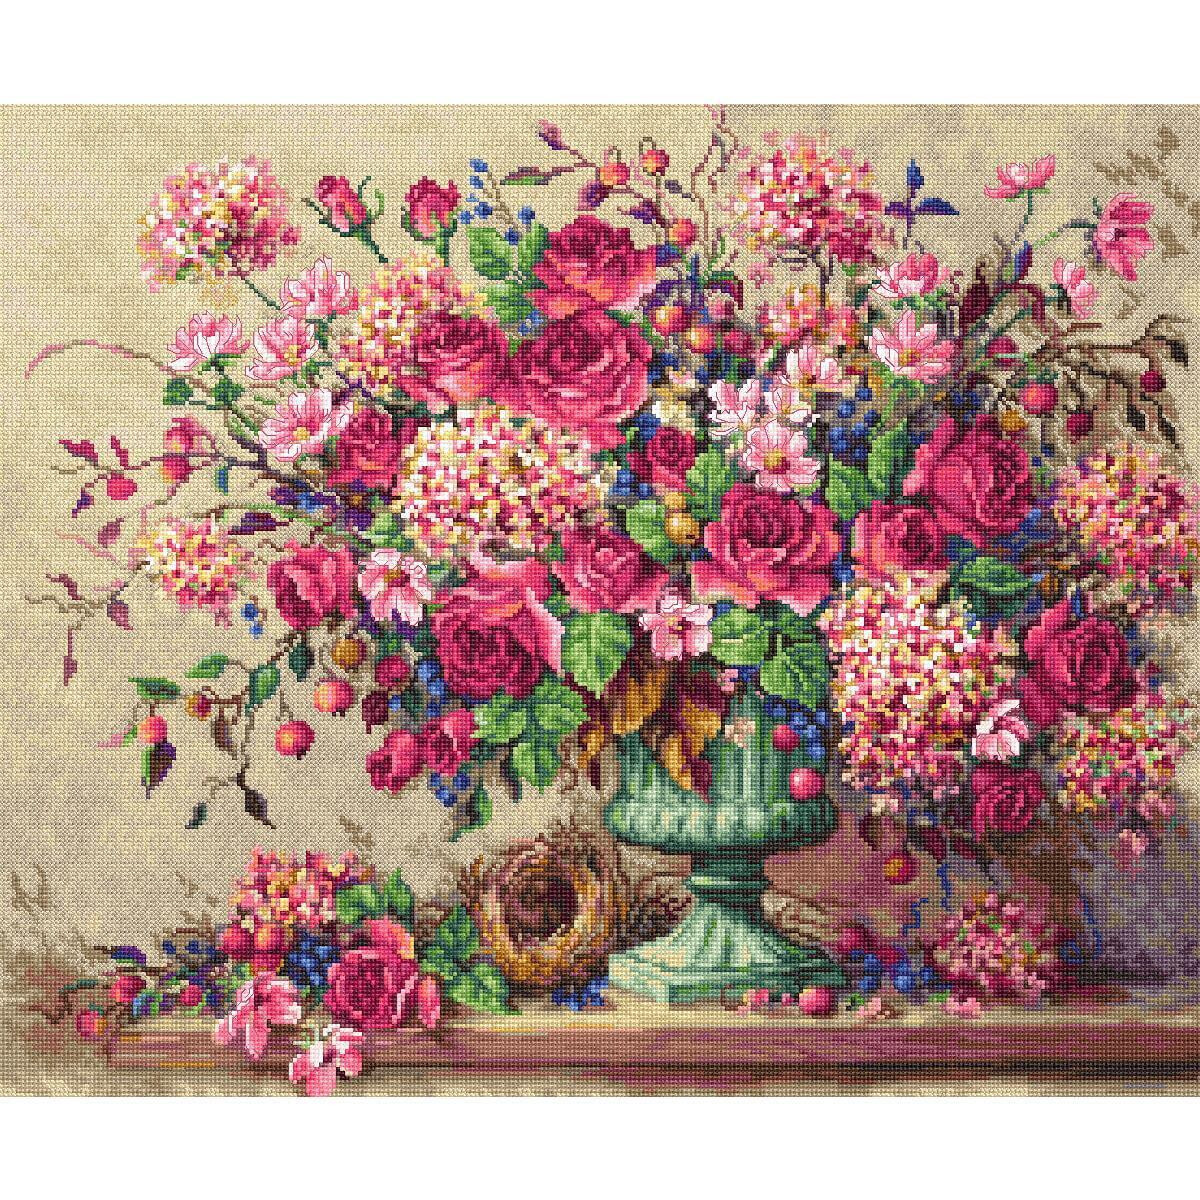 Letistitch counted cross stitch kit "Collete’s...